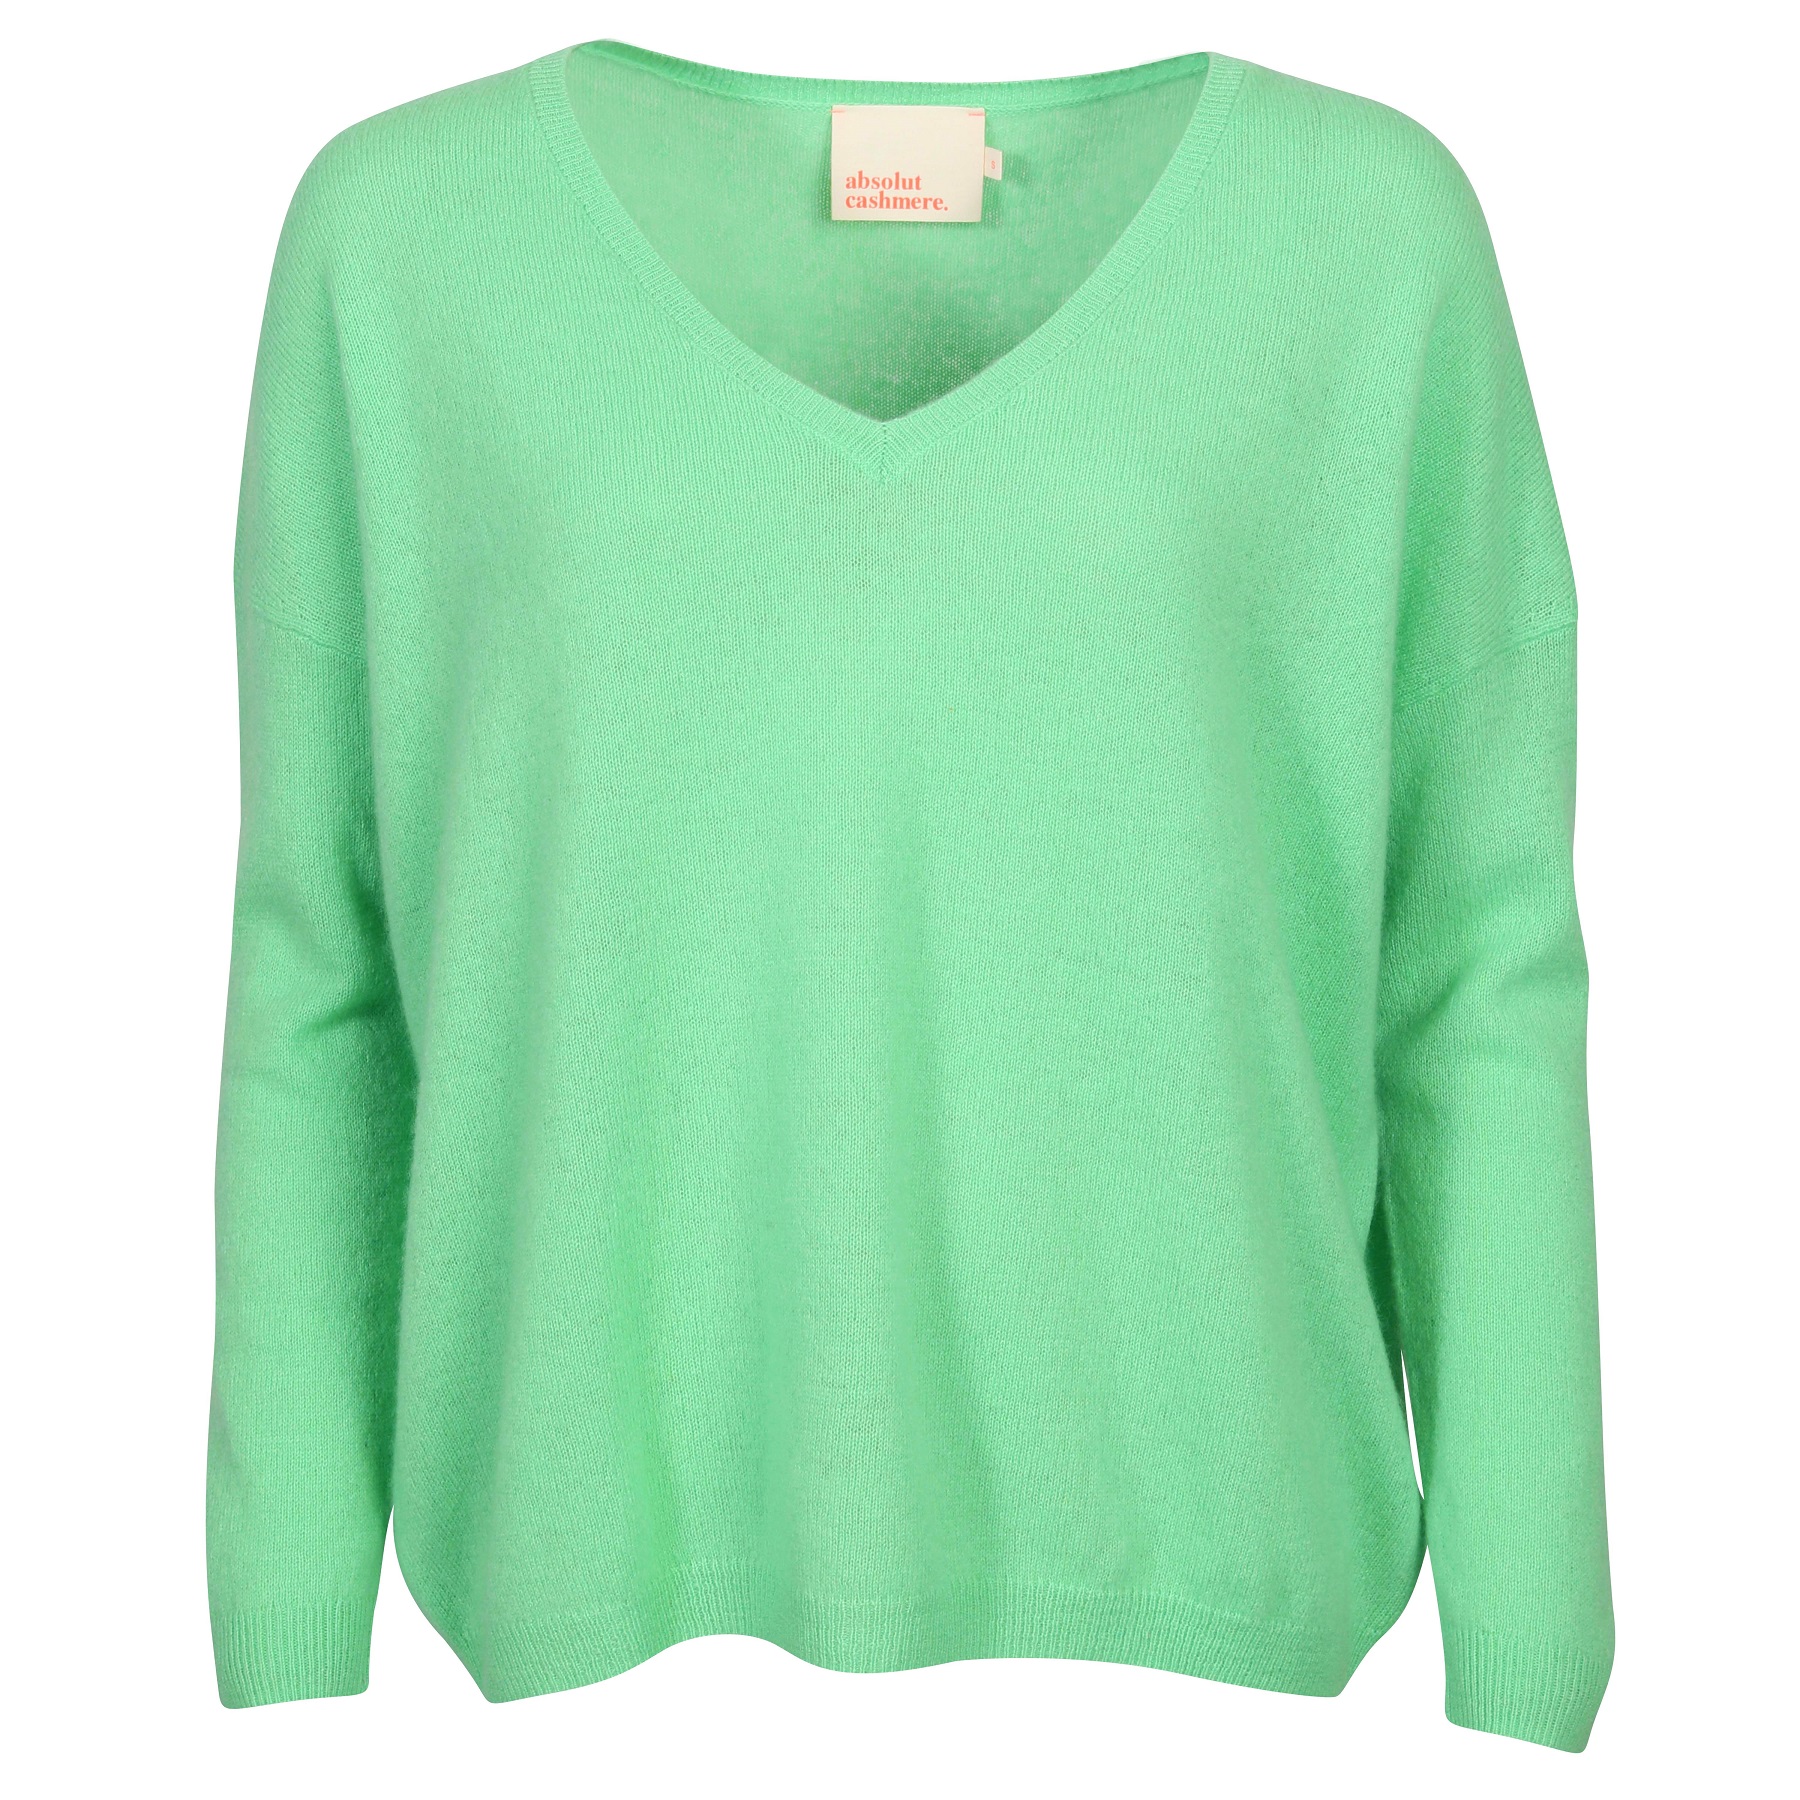 Absolut Cashmere Pullover Angele in Light Green S